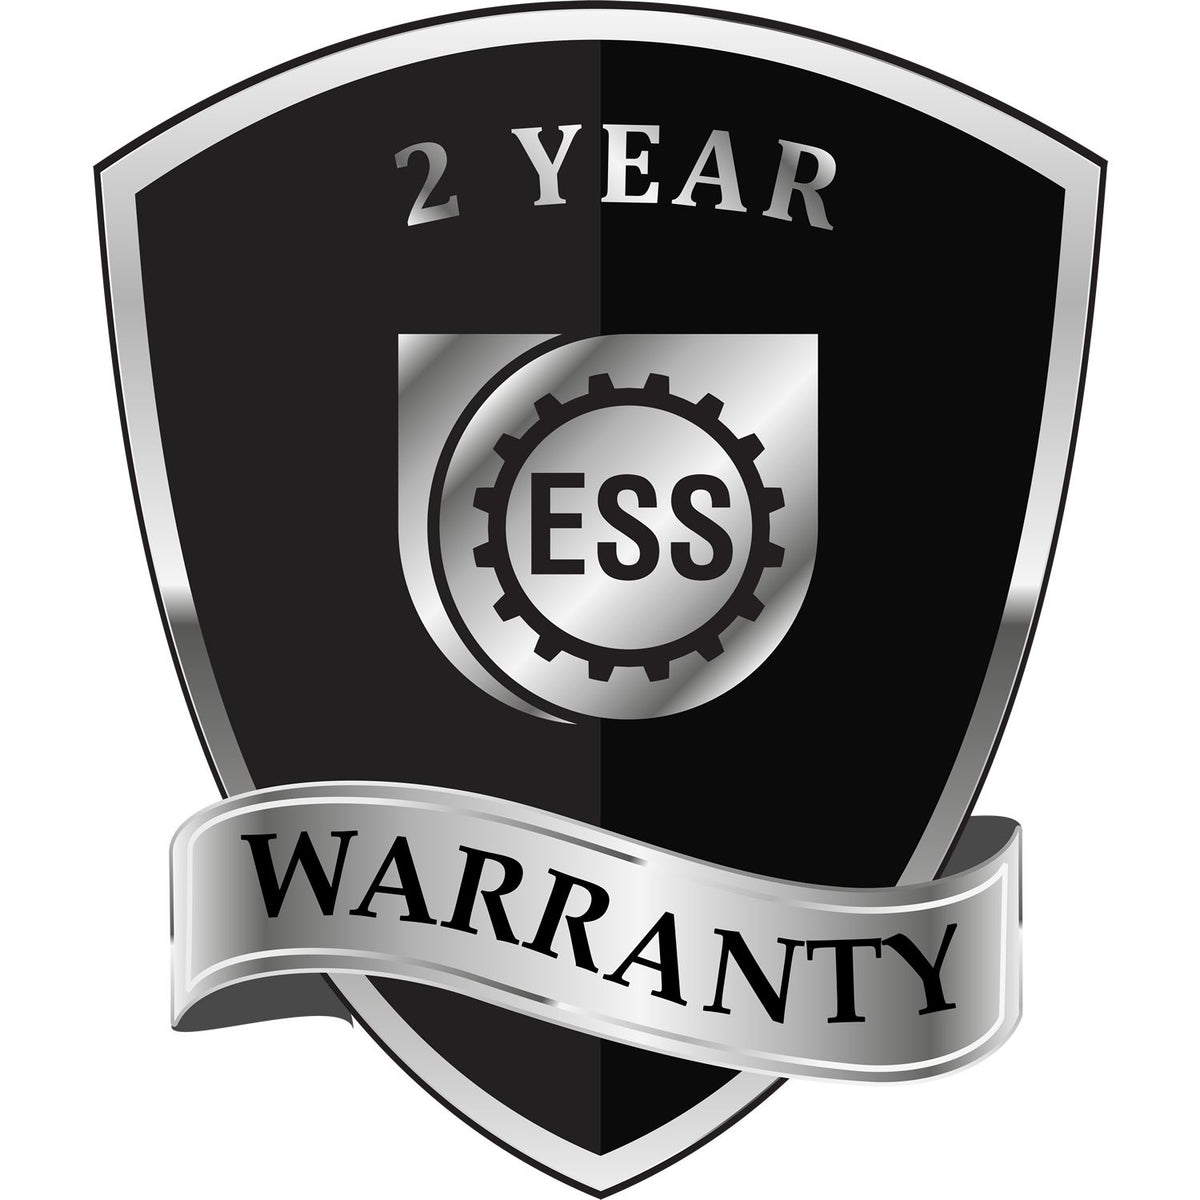 A badge or emblem showing a warranty icon for the Delaware Desk Architect Embossing Seal